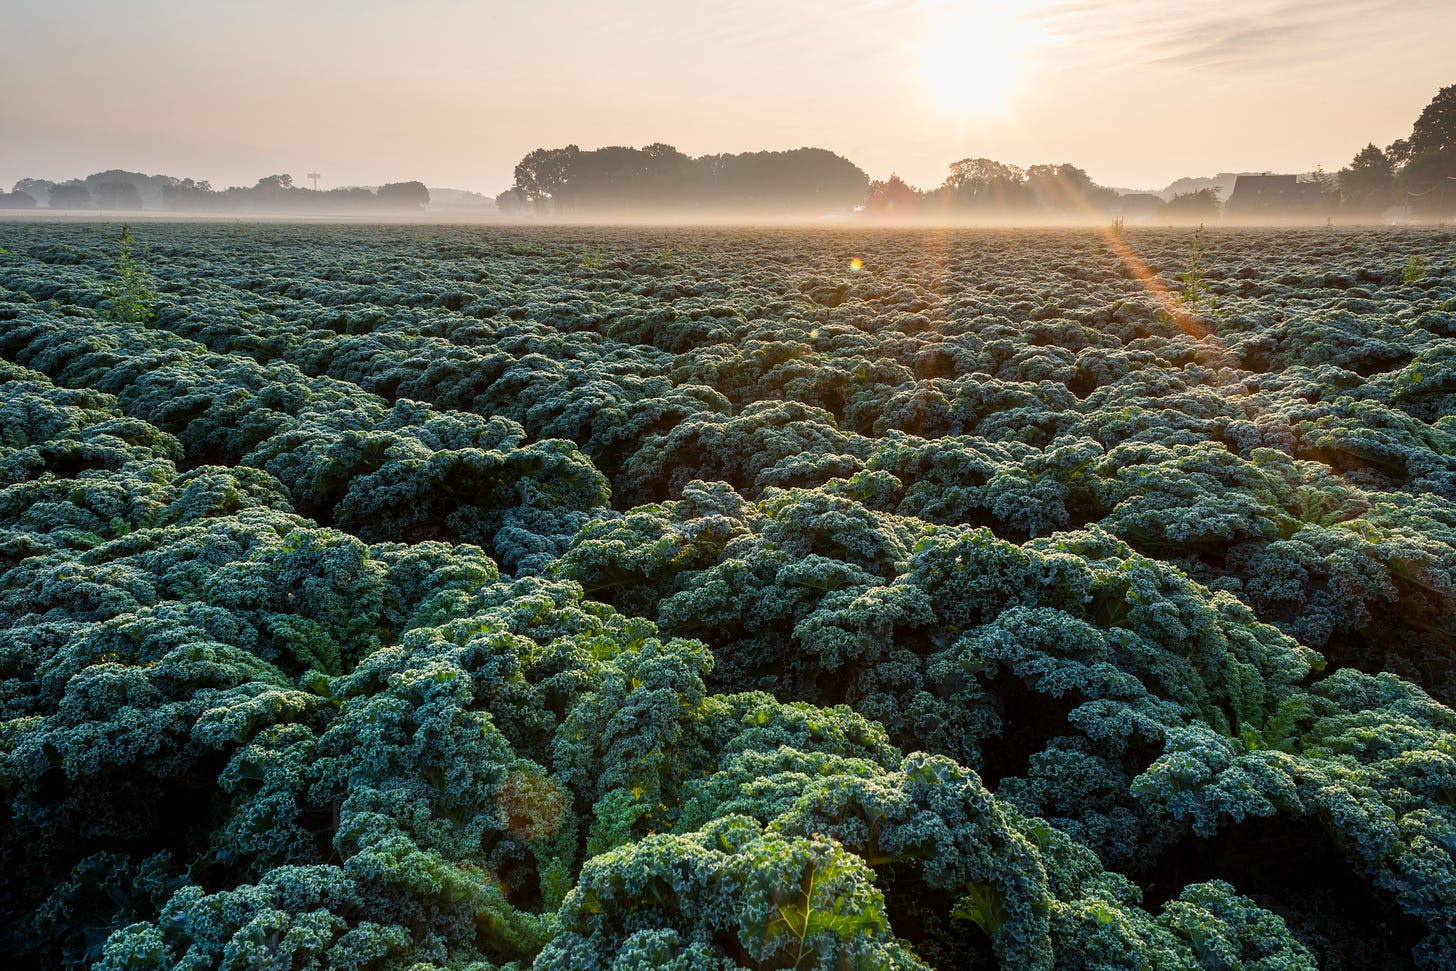 The sun rising over a misty field of kale